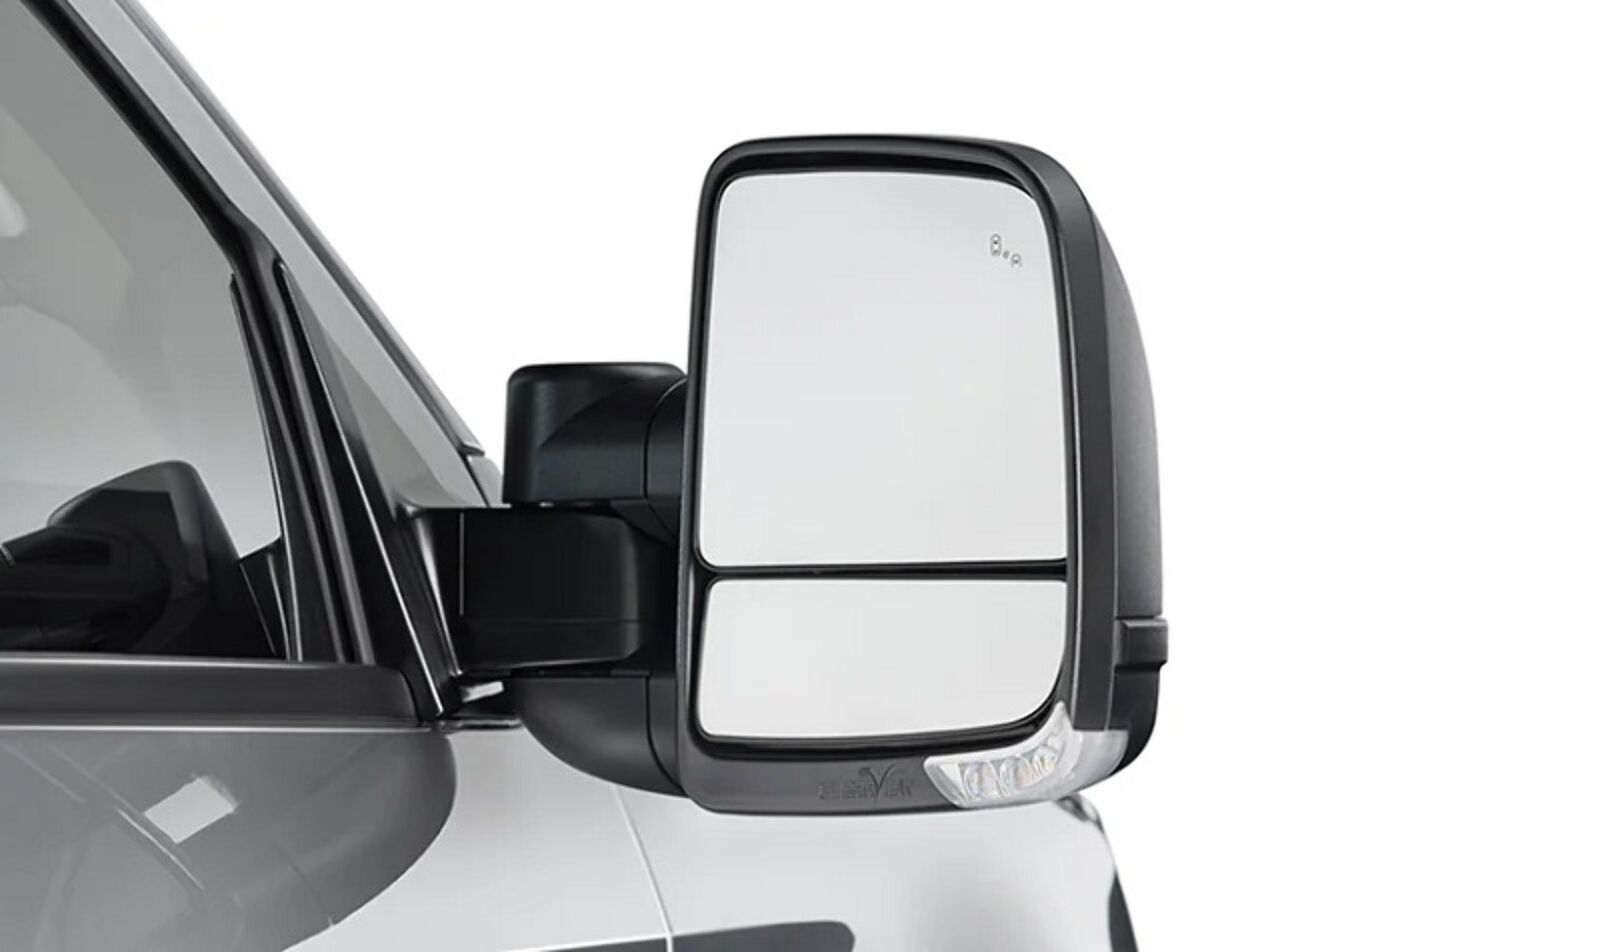 Toyota Landcruiser 70 Series (1984-2020) 75, 76, 78, 79 Series Clearview Towing Mirrors